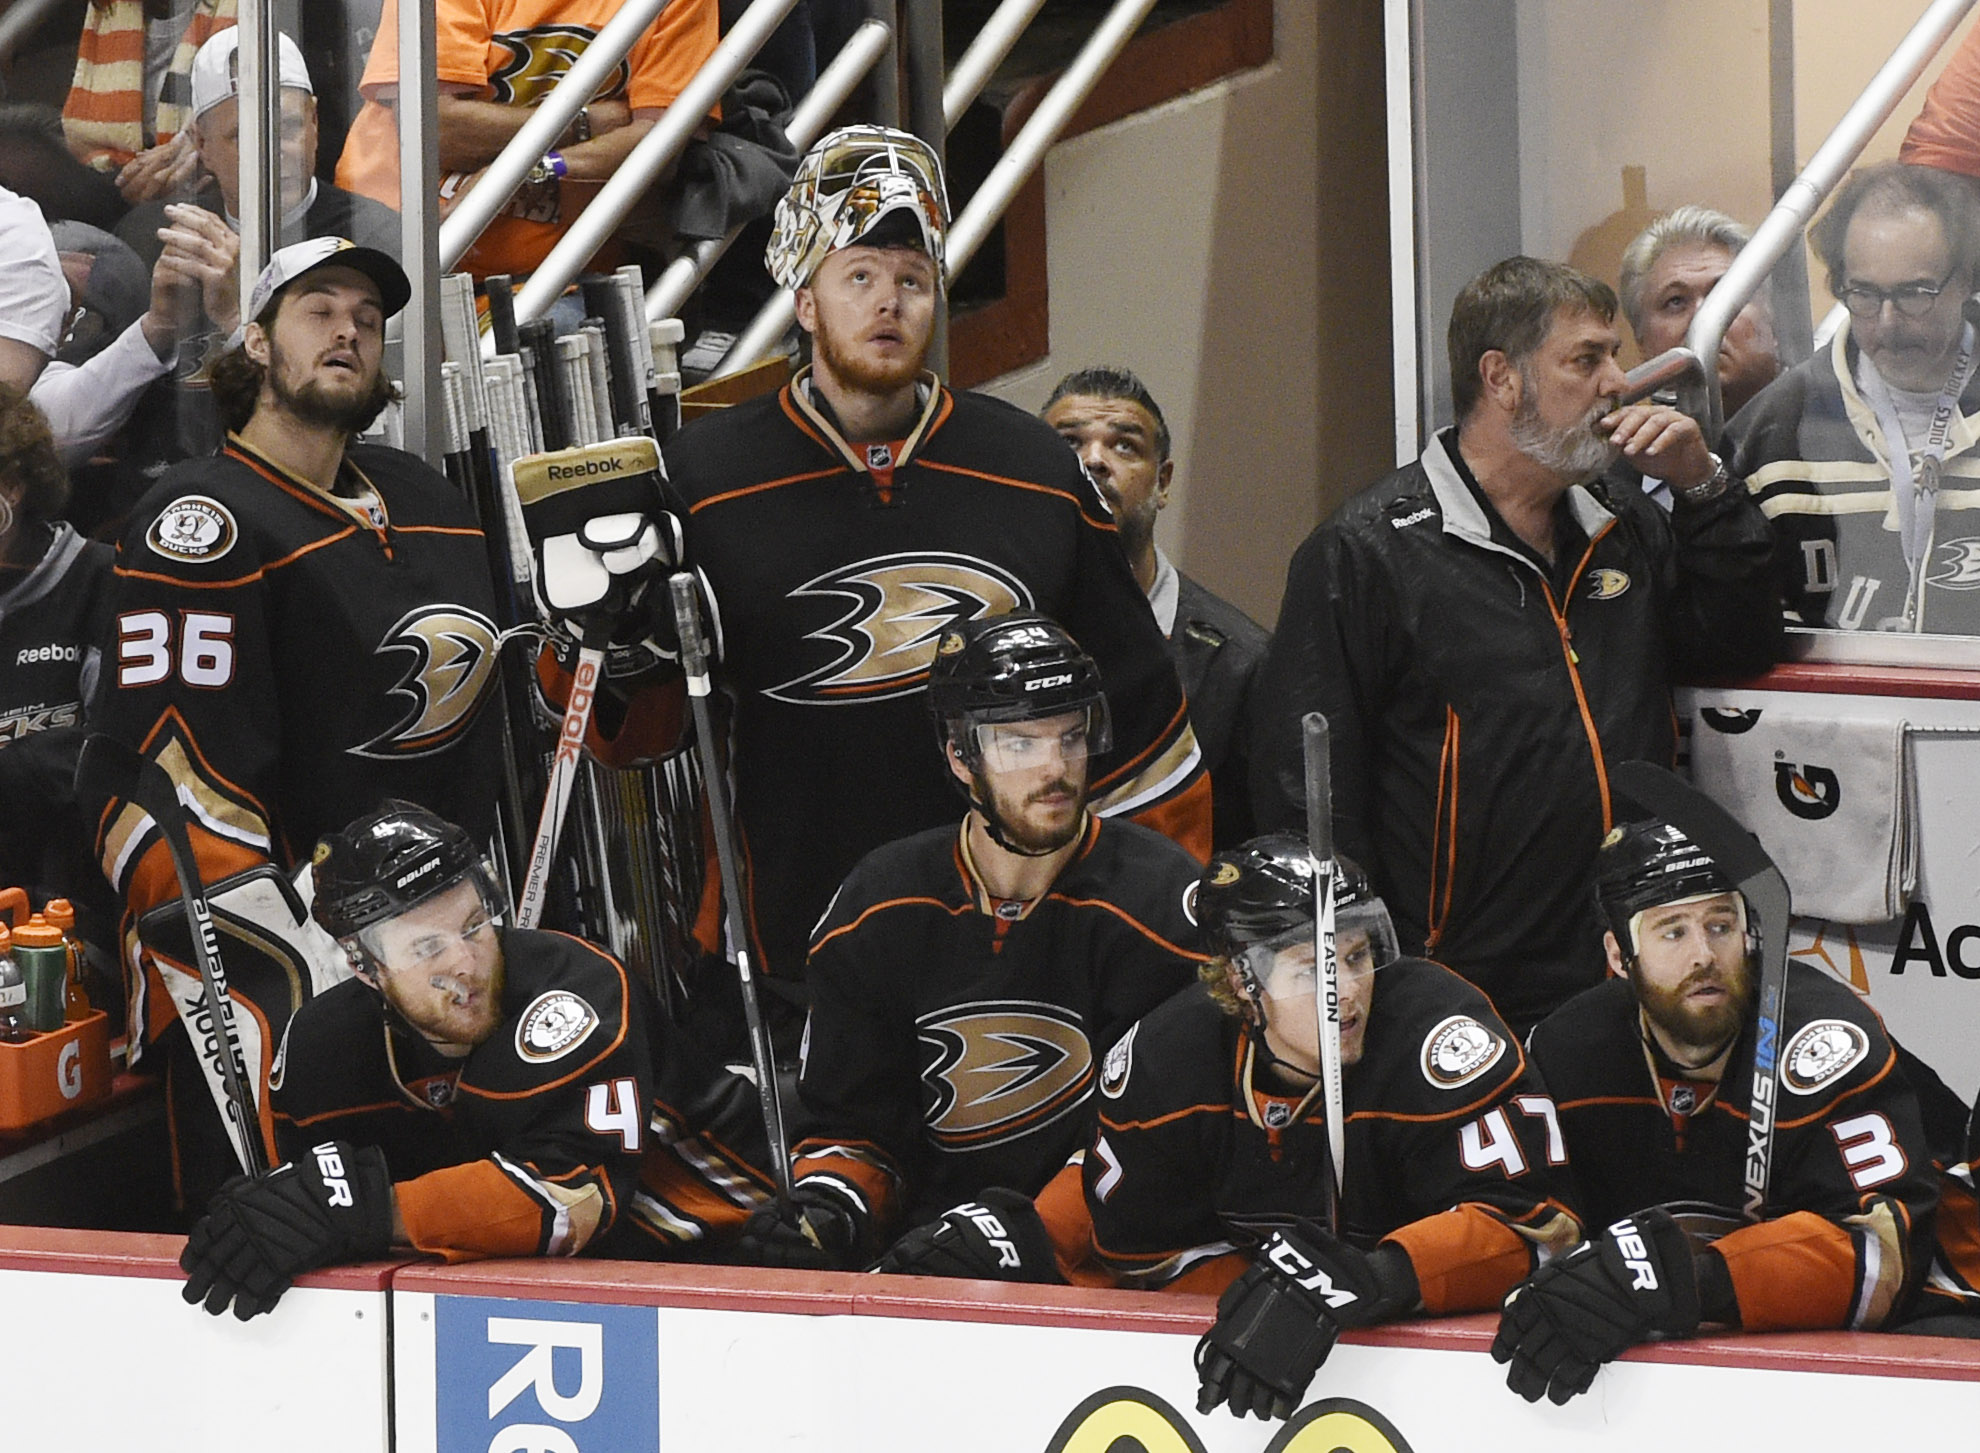 The Ducks are once again looking up at another team hoisting the Cup, but things are also looking up for the franchise.